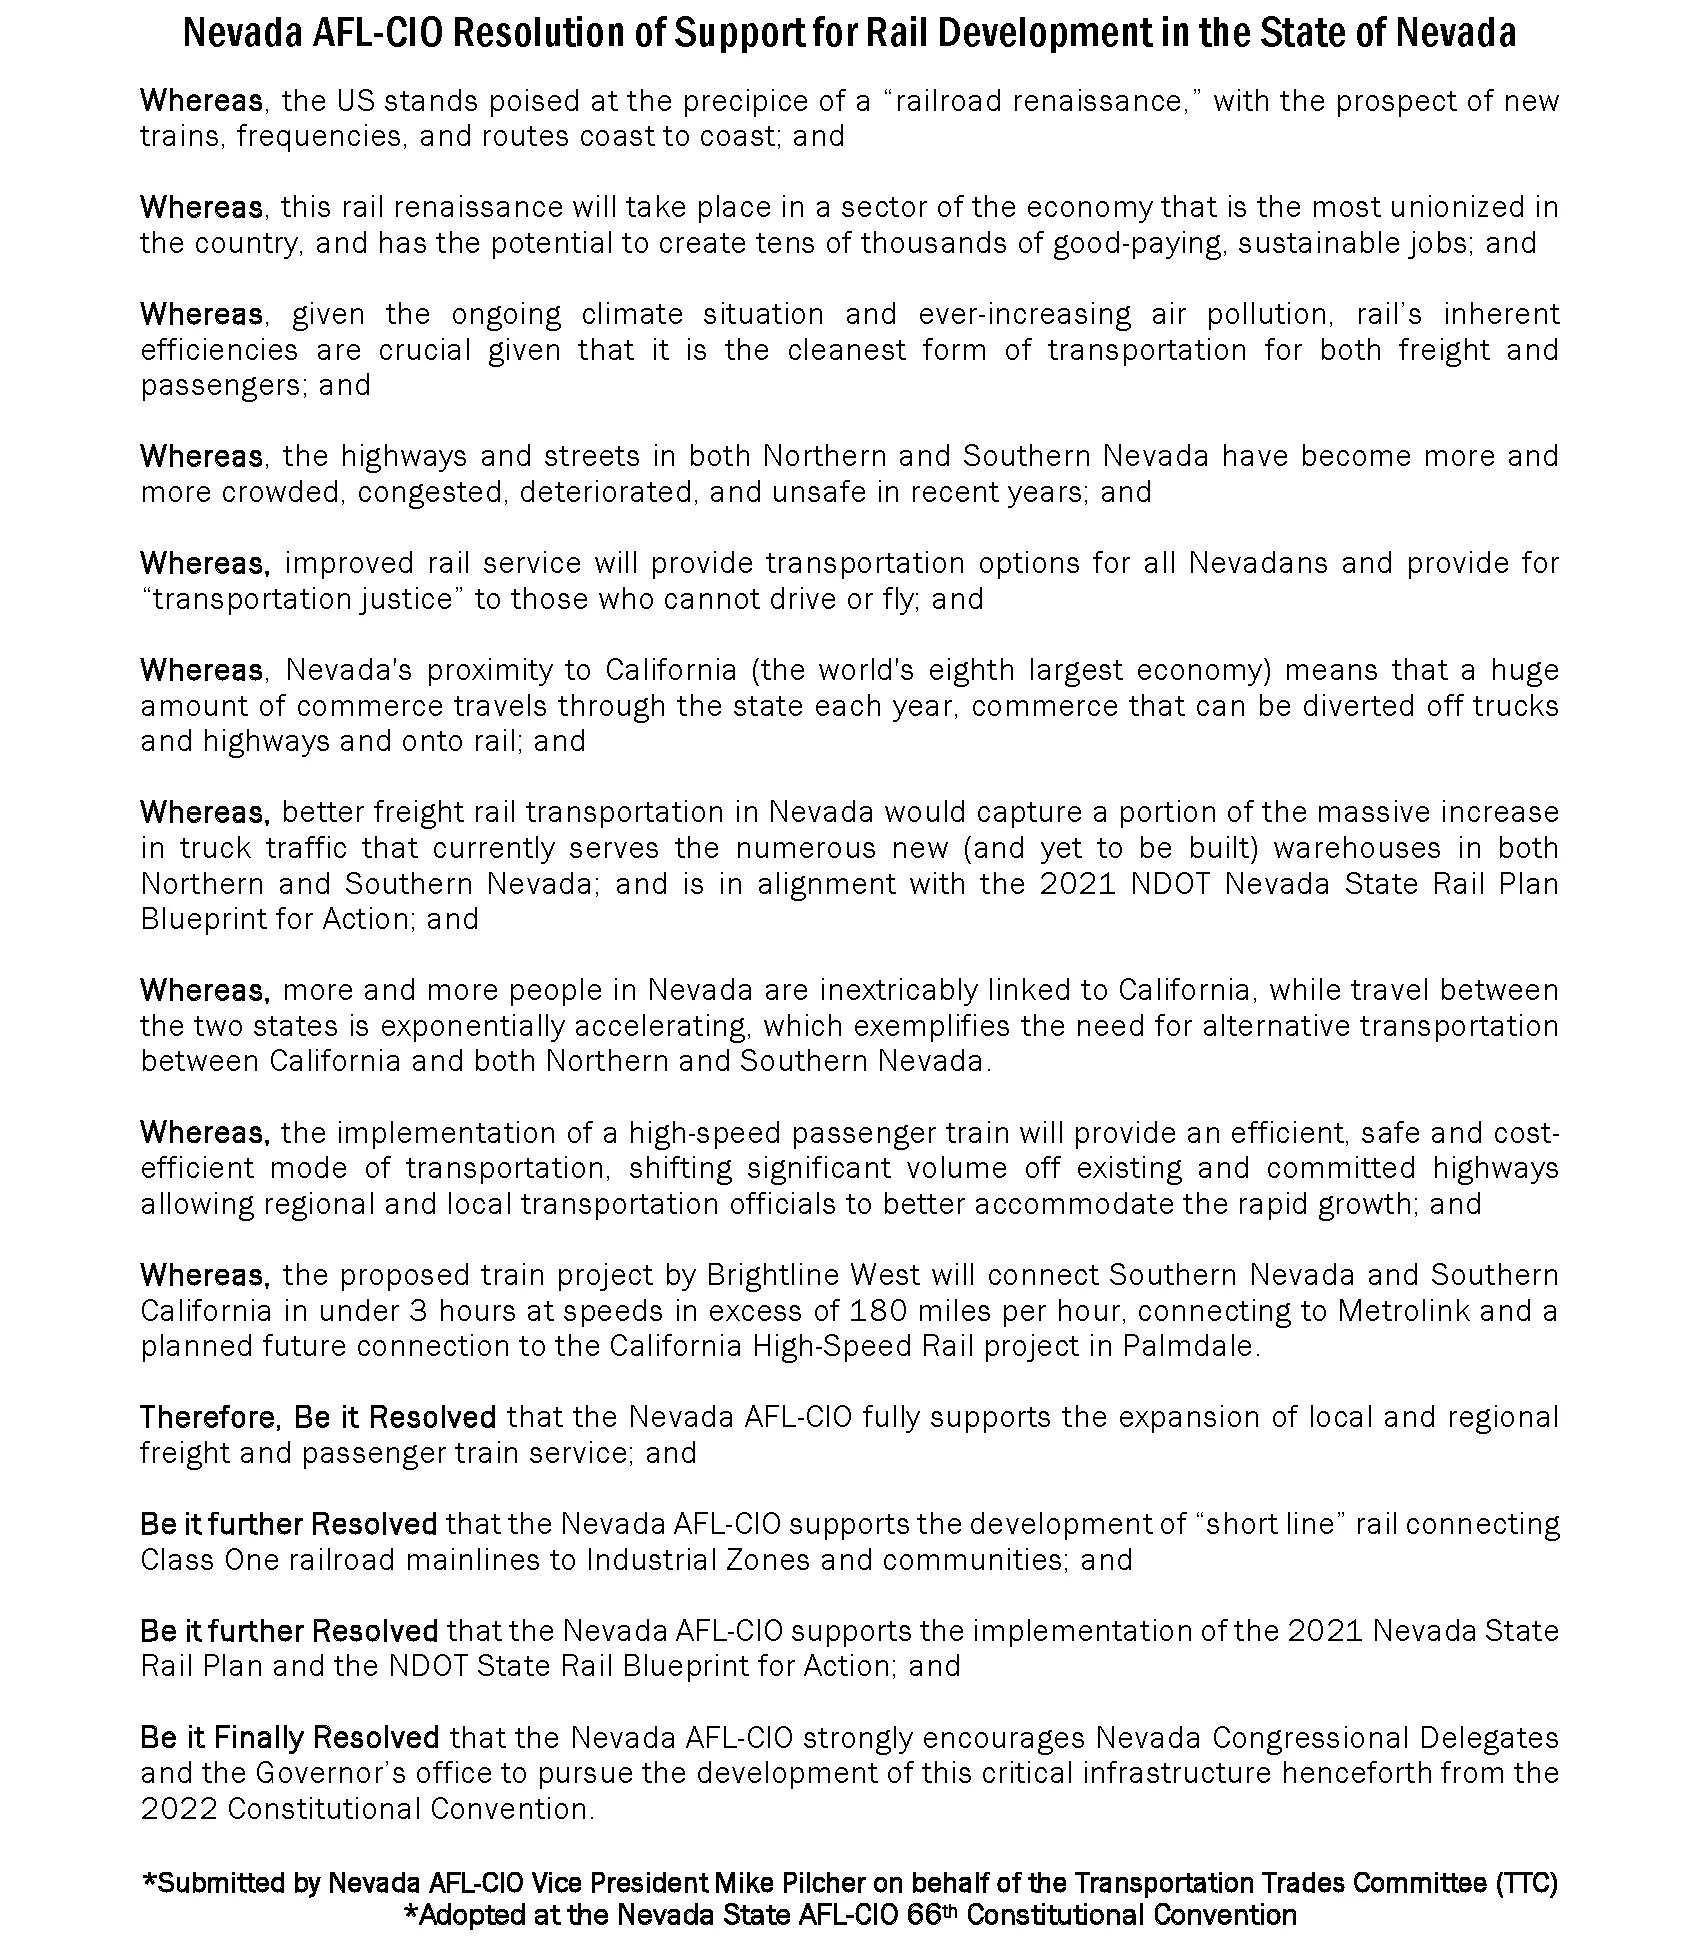 Nevada AFL-CIO Resolution of Support for Rail Development in the State of Nevada